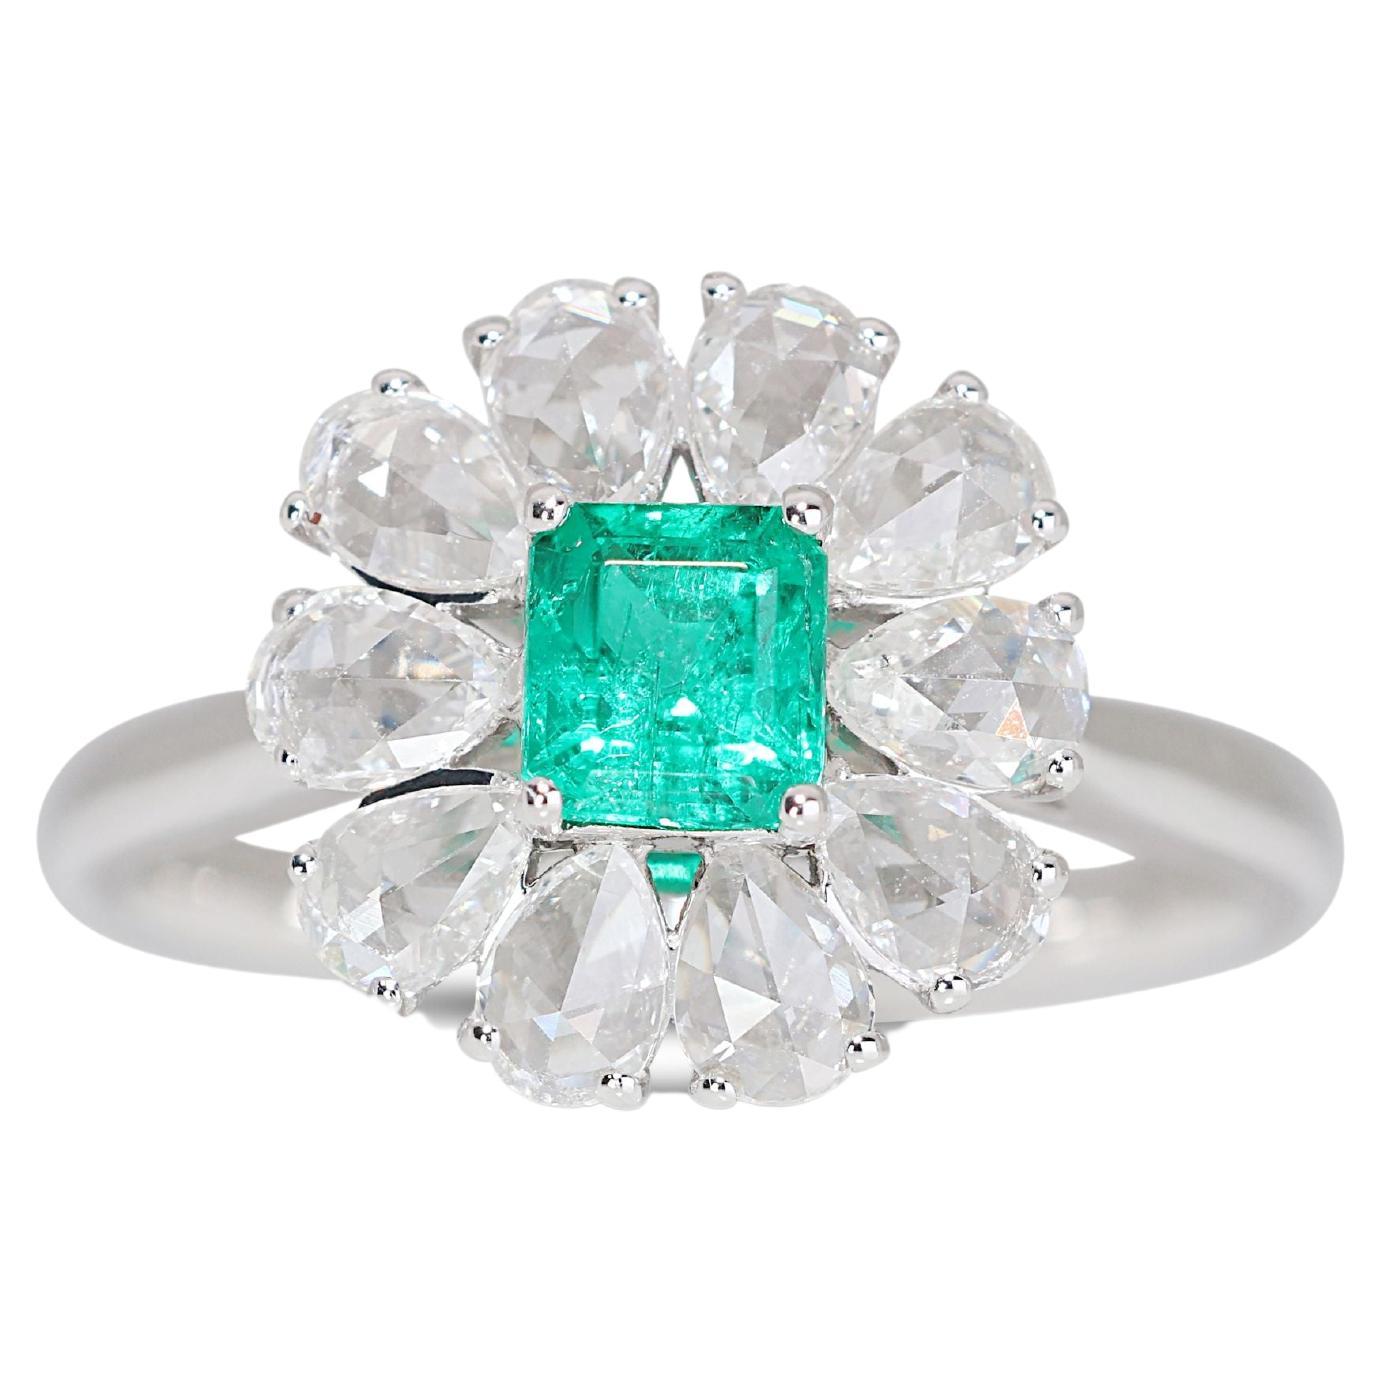 Magnificent 18K White Gold Emerald Flower Ring